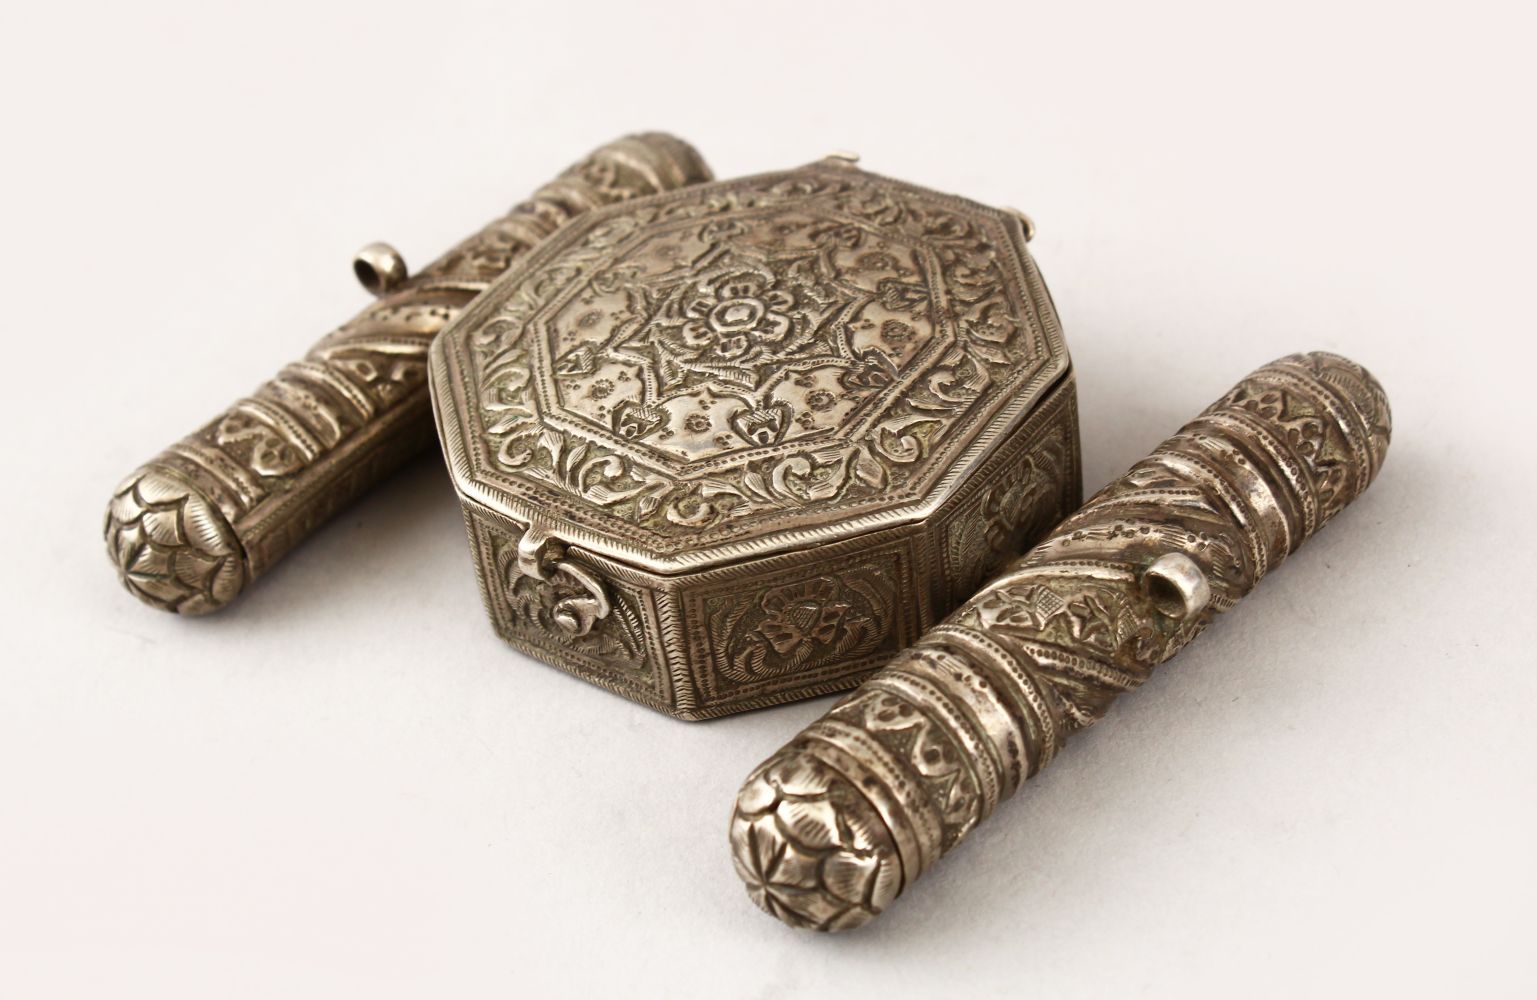 A GOOD CAUCASIAN SILVER BAZBAND AMULET CASE, with embossed decoration, 10cm x 8cm